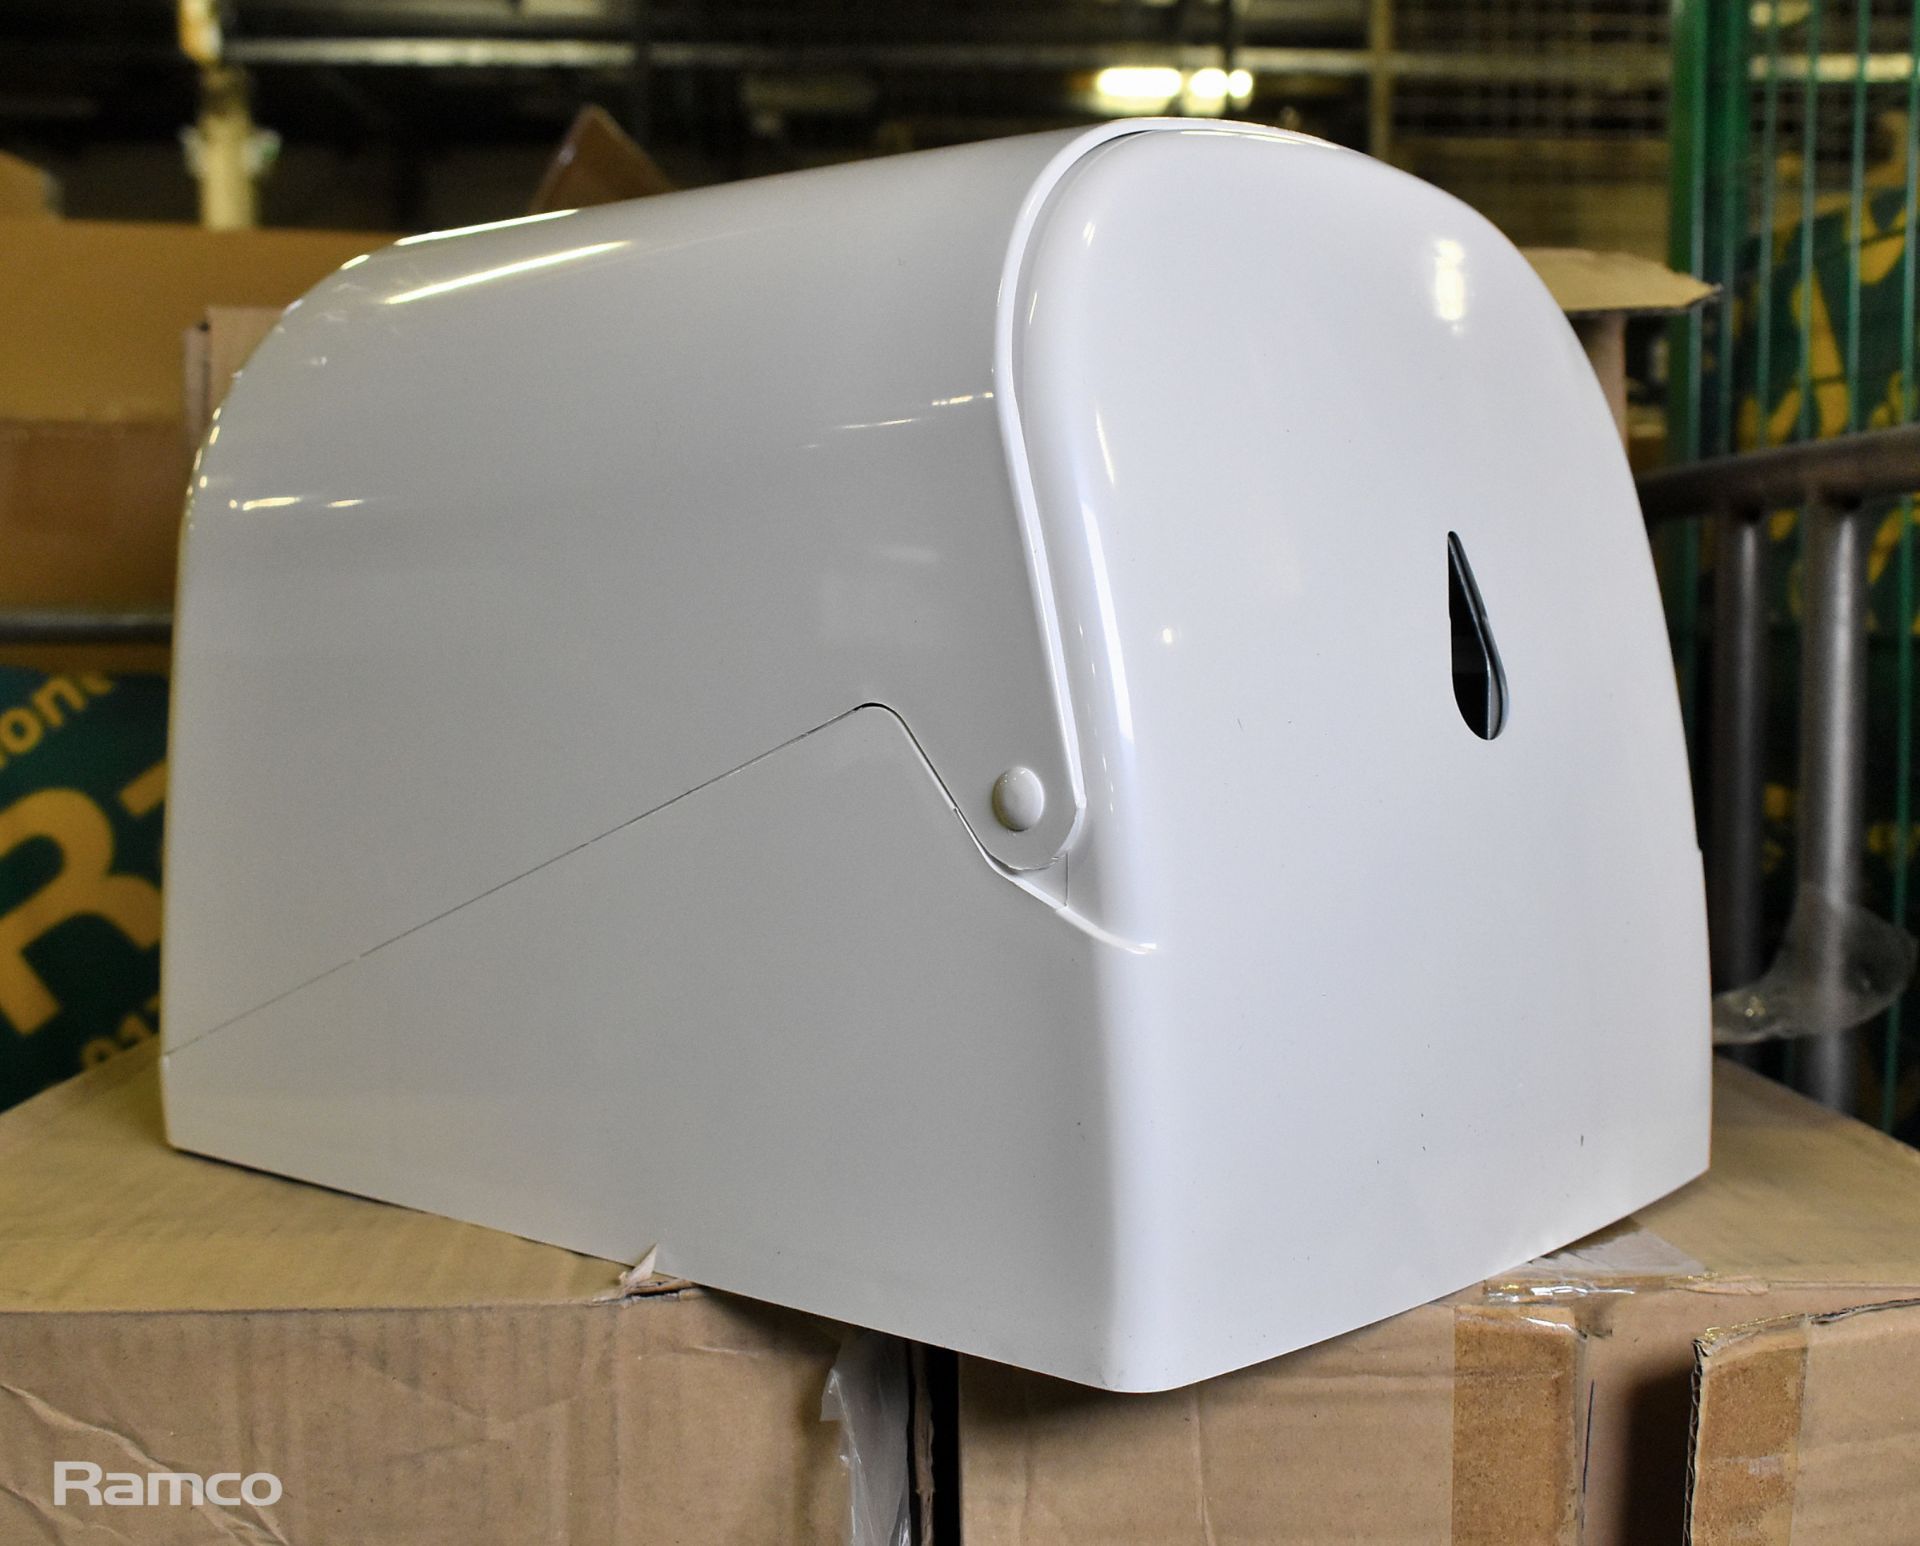 6x Anonimo AG40001 Paper towel dispensers - Image 2 of 4